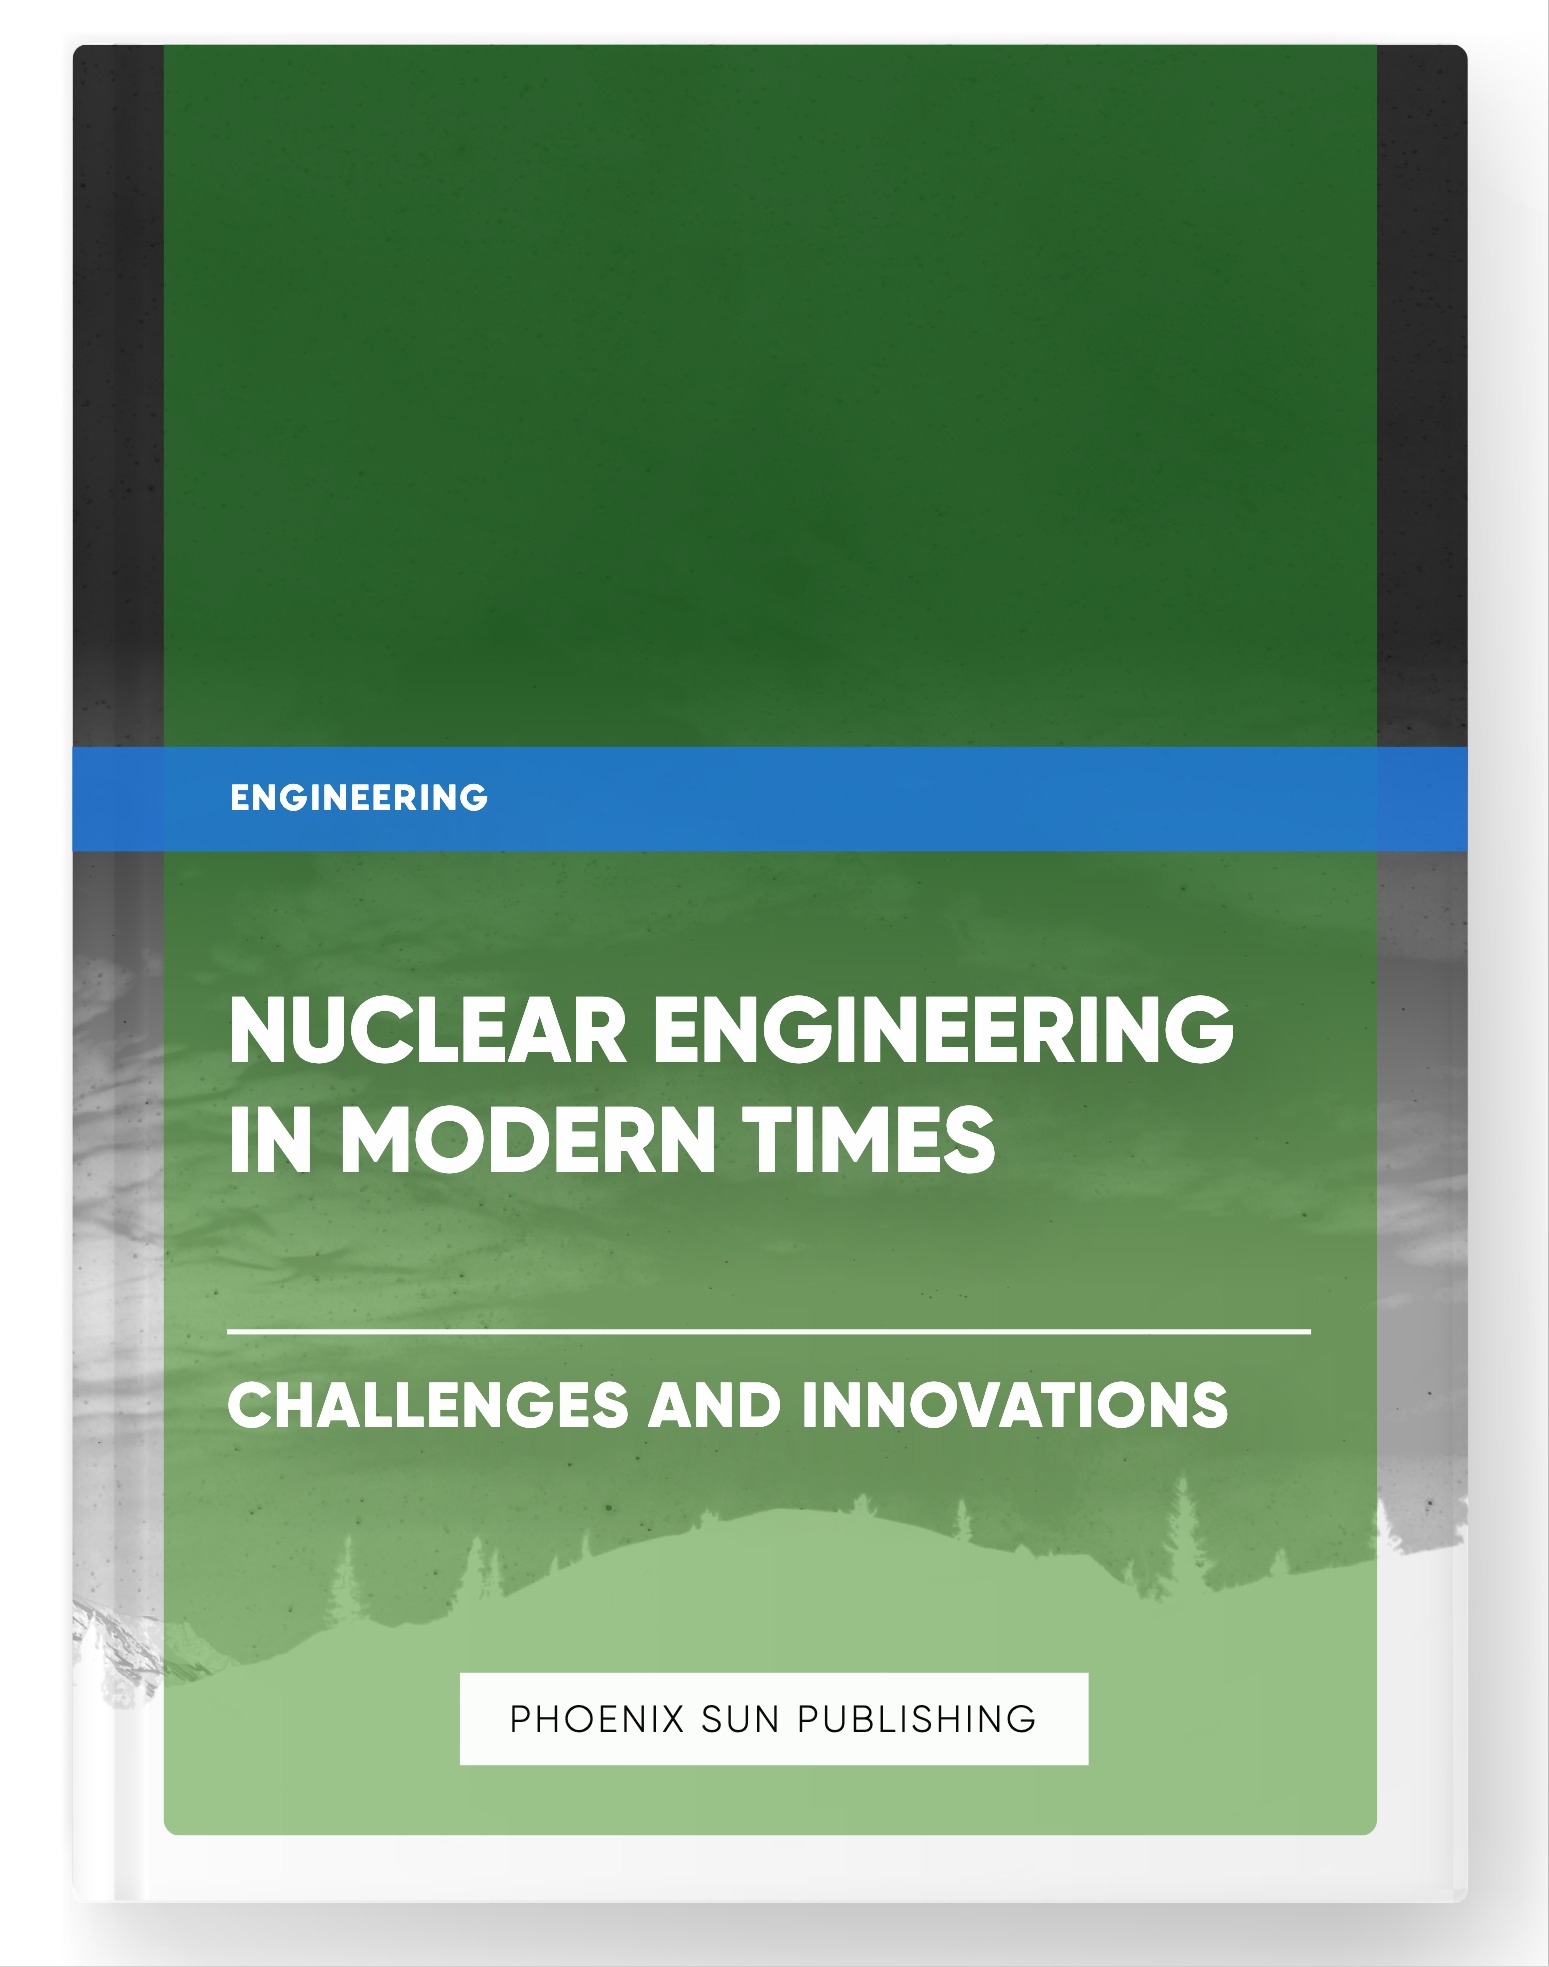 Nuclear Engineering in Modern Times – Challenges and Innovations